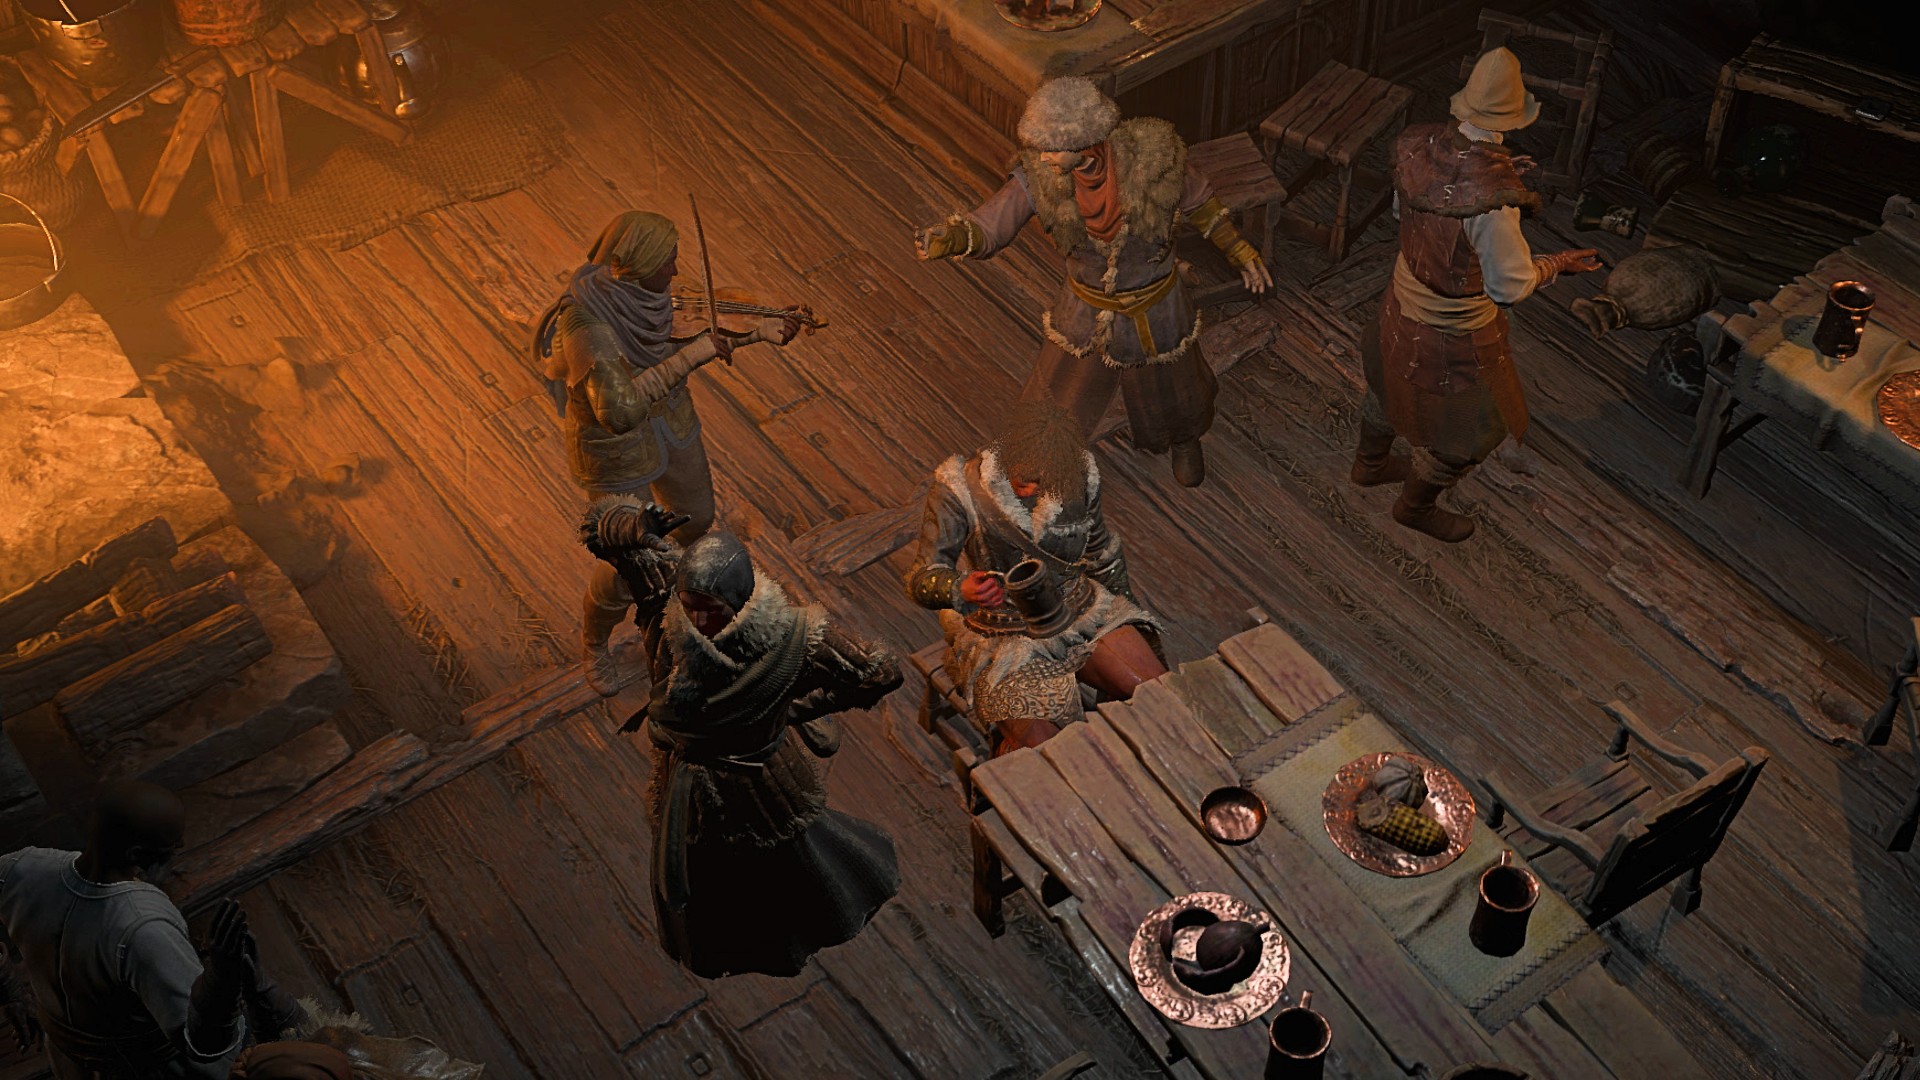 Villagers dance around the player inside a dimly lit tavern